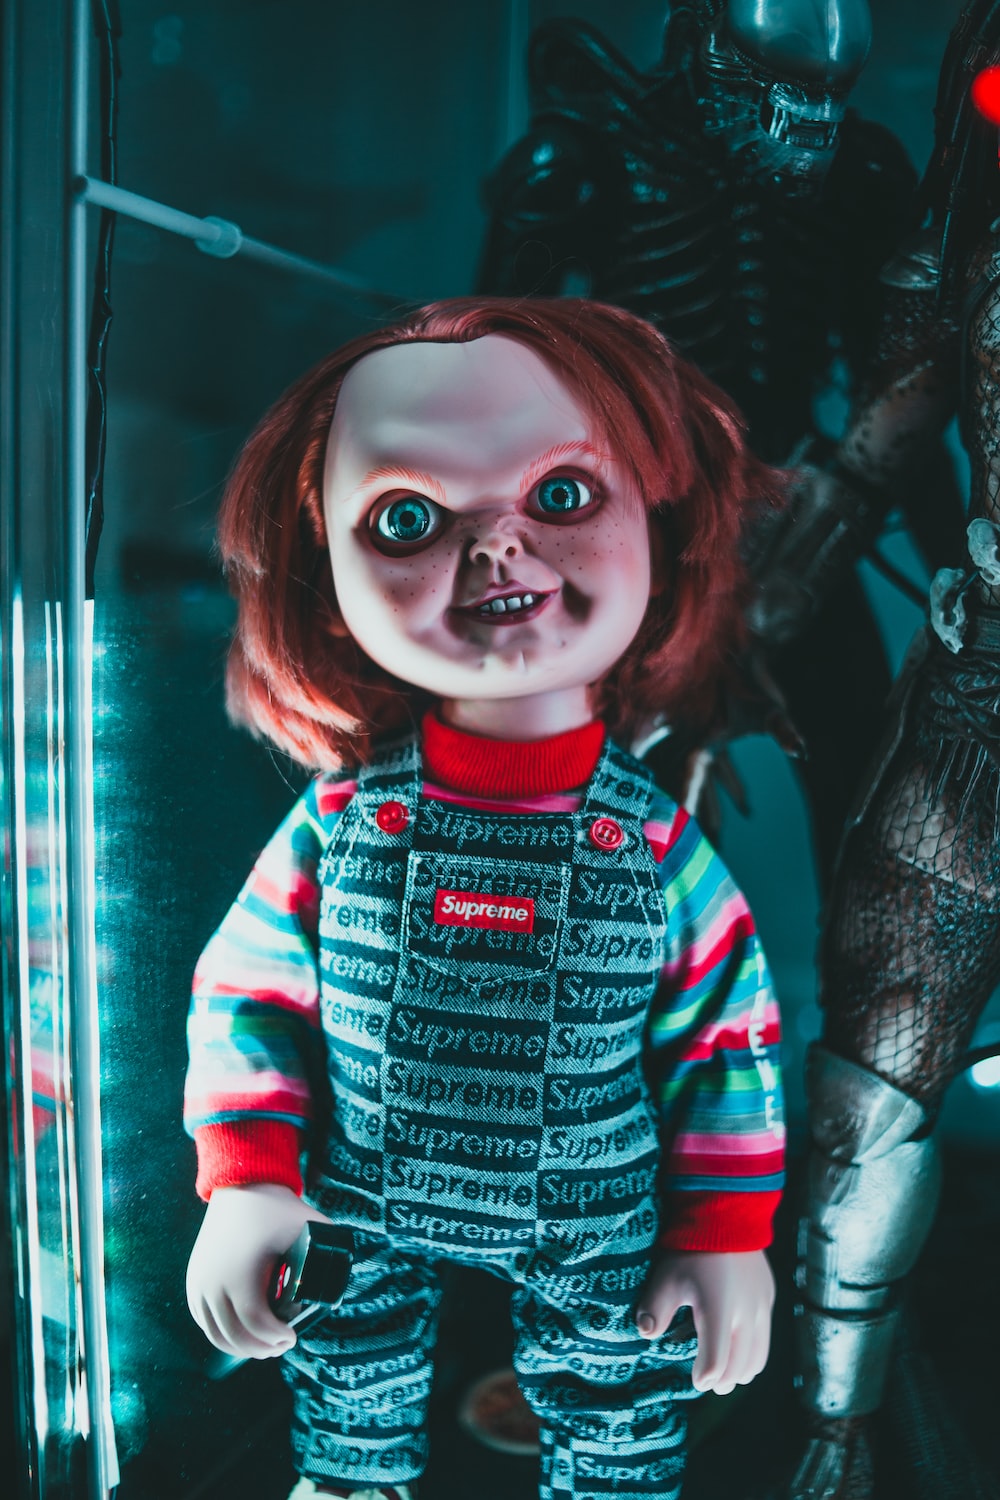 Creepy Doll Picture. Download Free Image